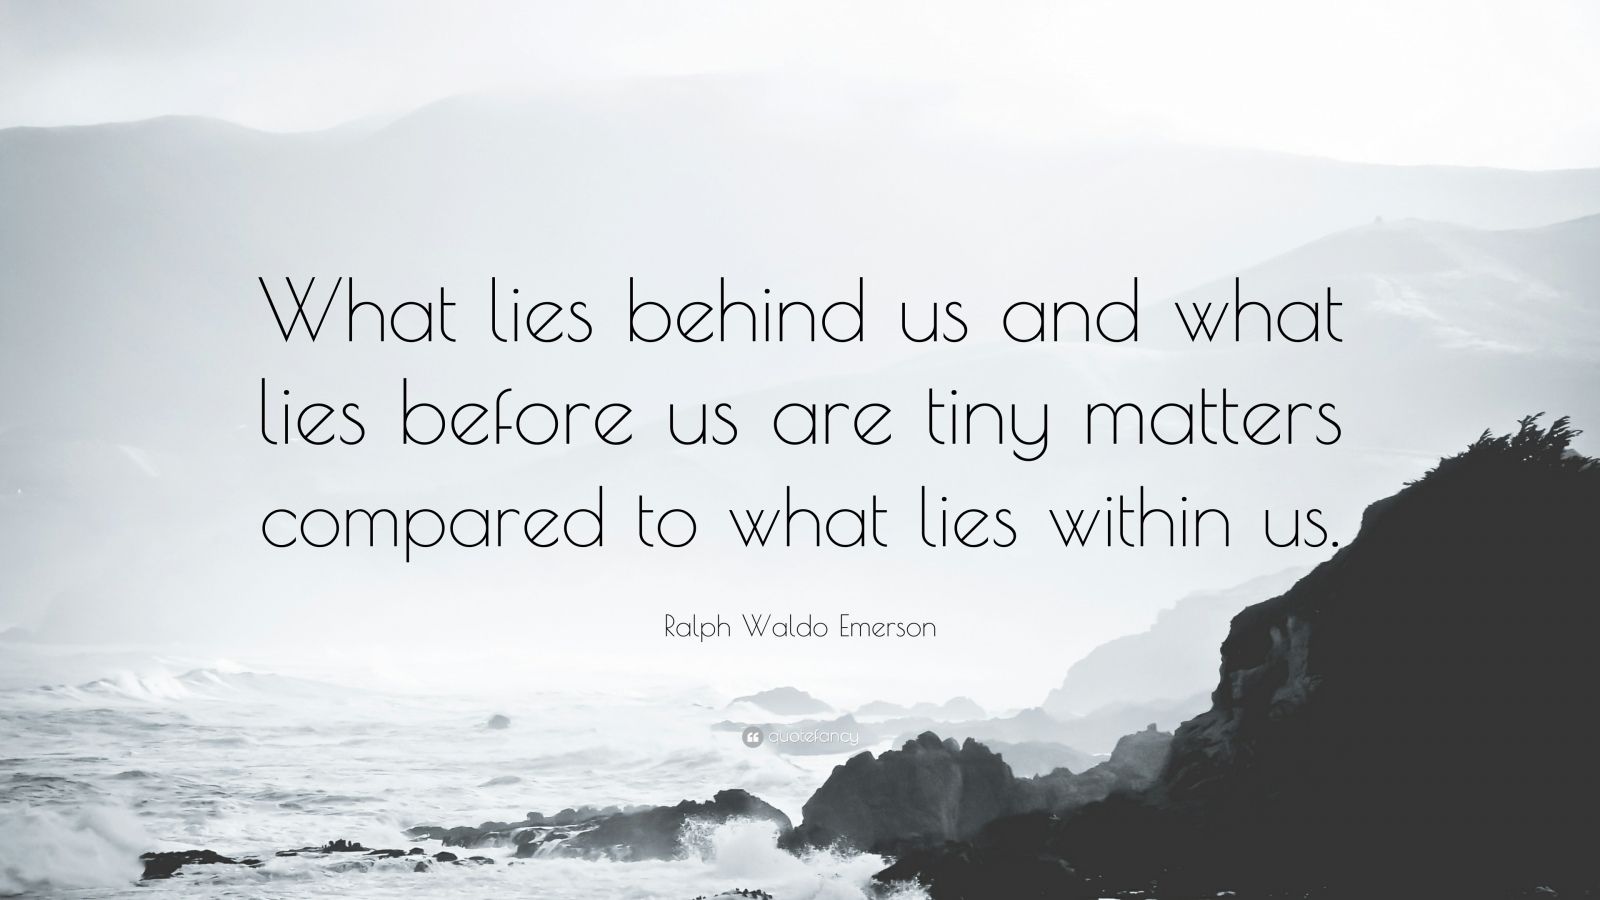 Ralph Waldo Emerson Quote: “What lies behind us and what lies before us